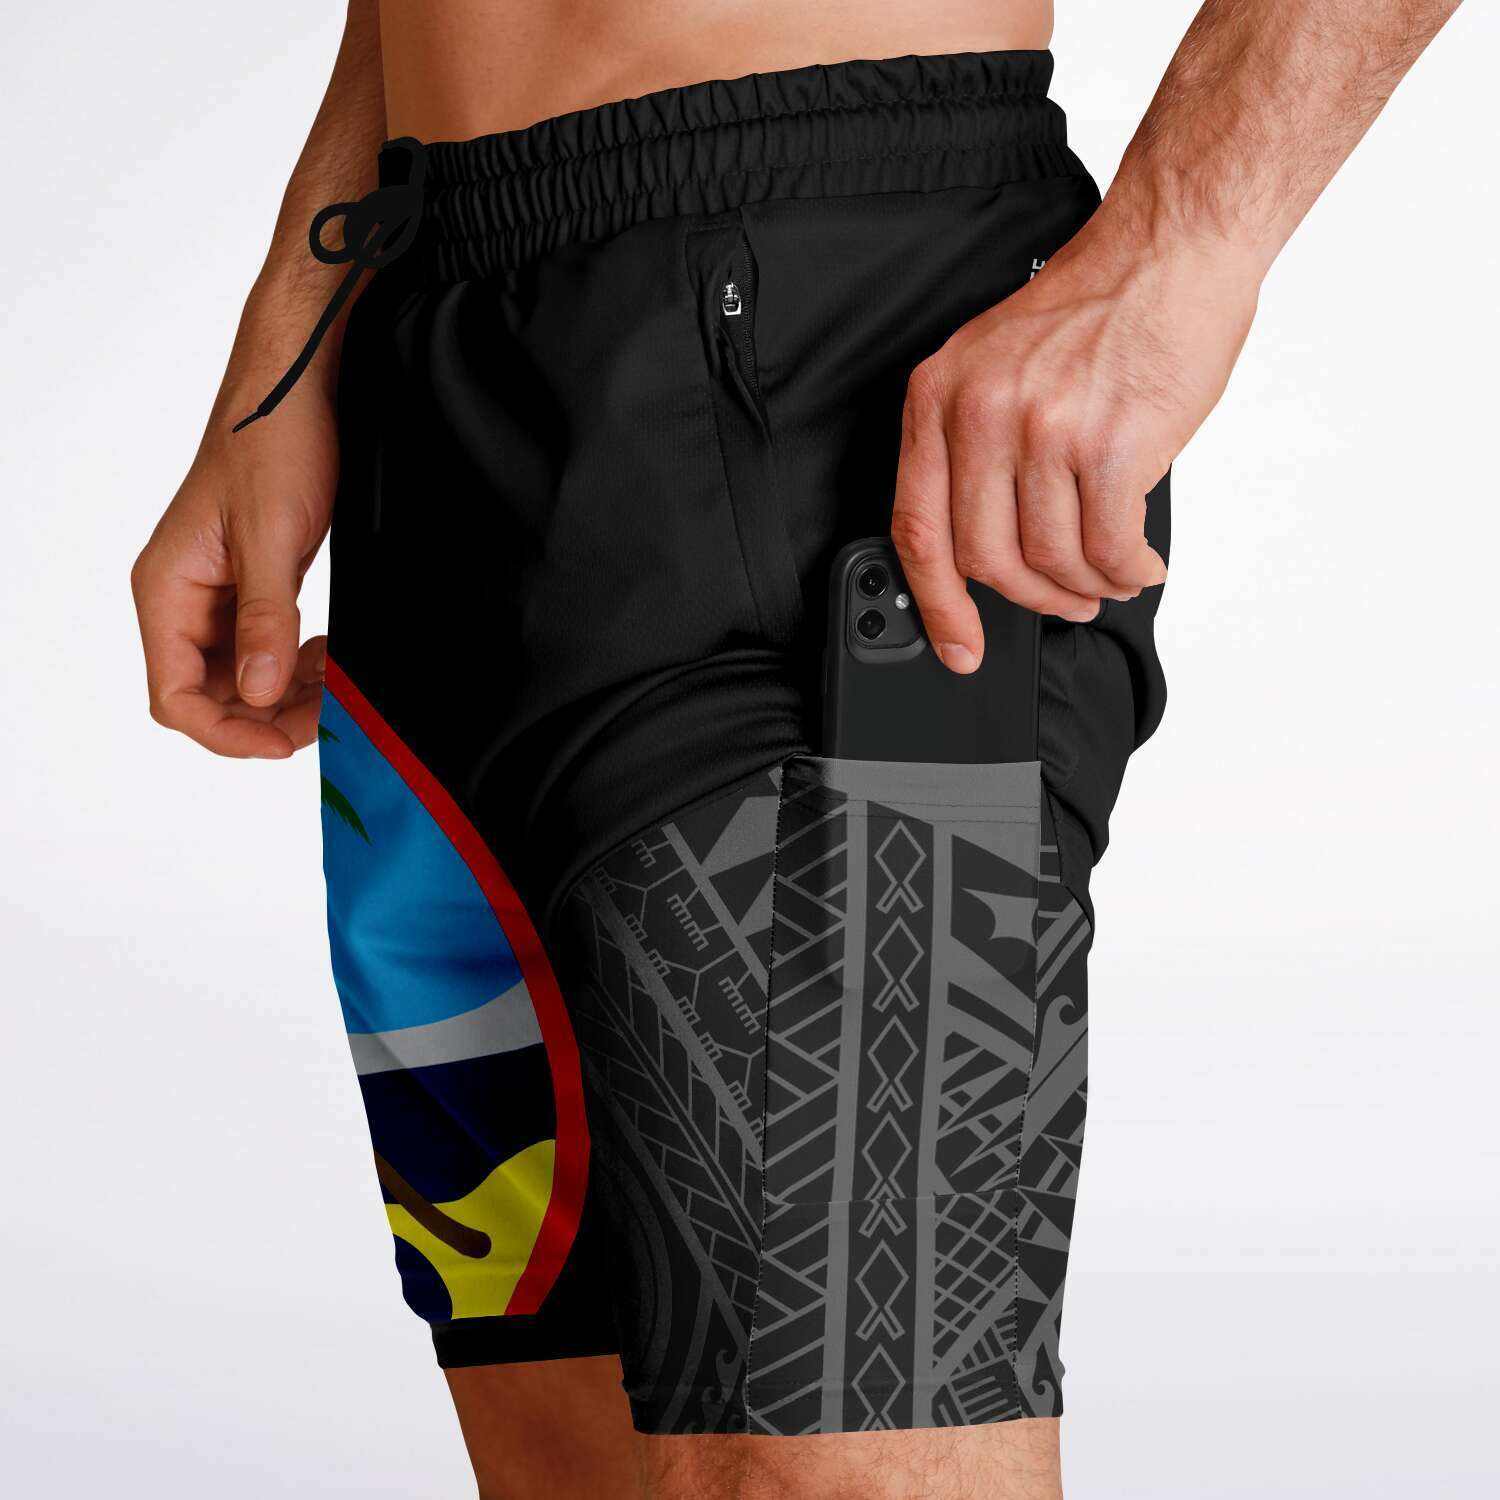 Guam Tribal Layer 2-in-1 Phone Pocket Active Shorts